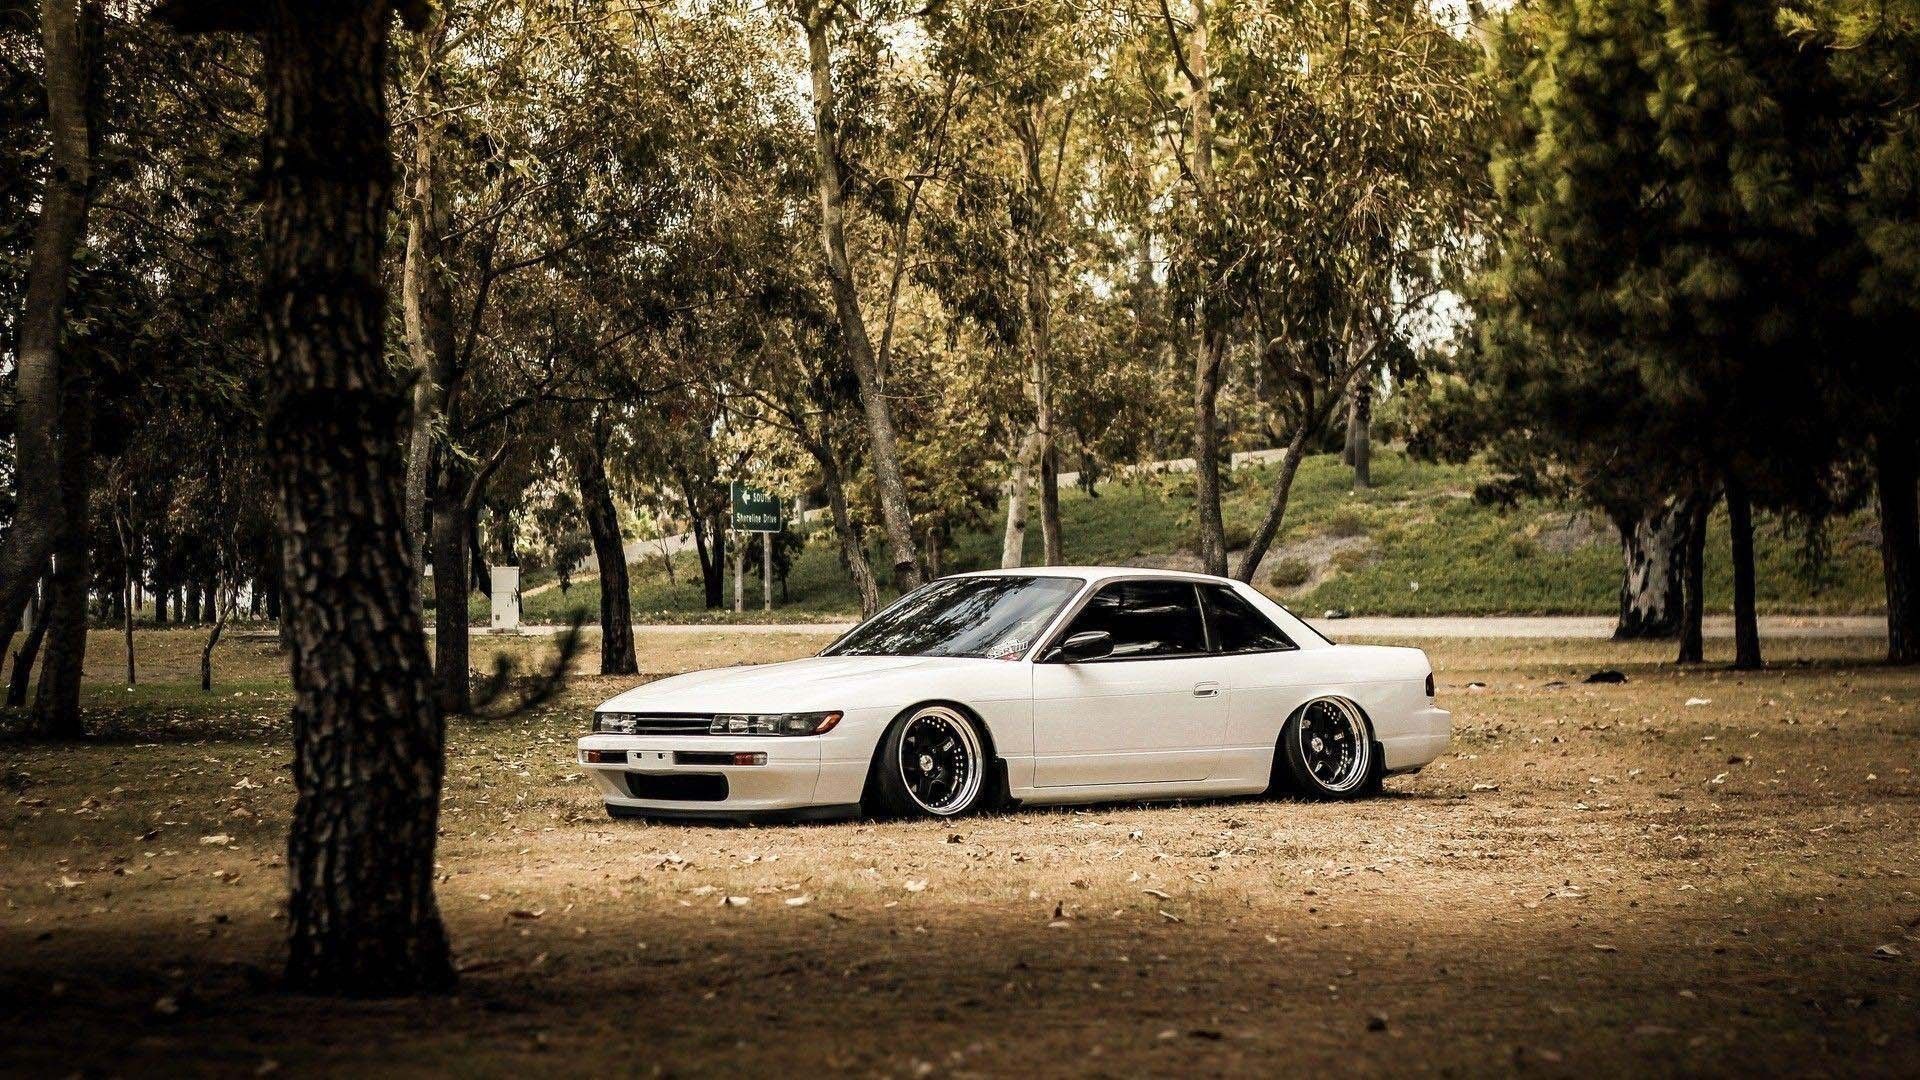 A car parked in the middle of some trees - JDM